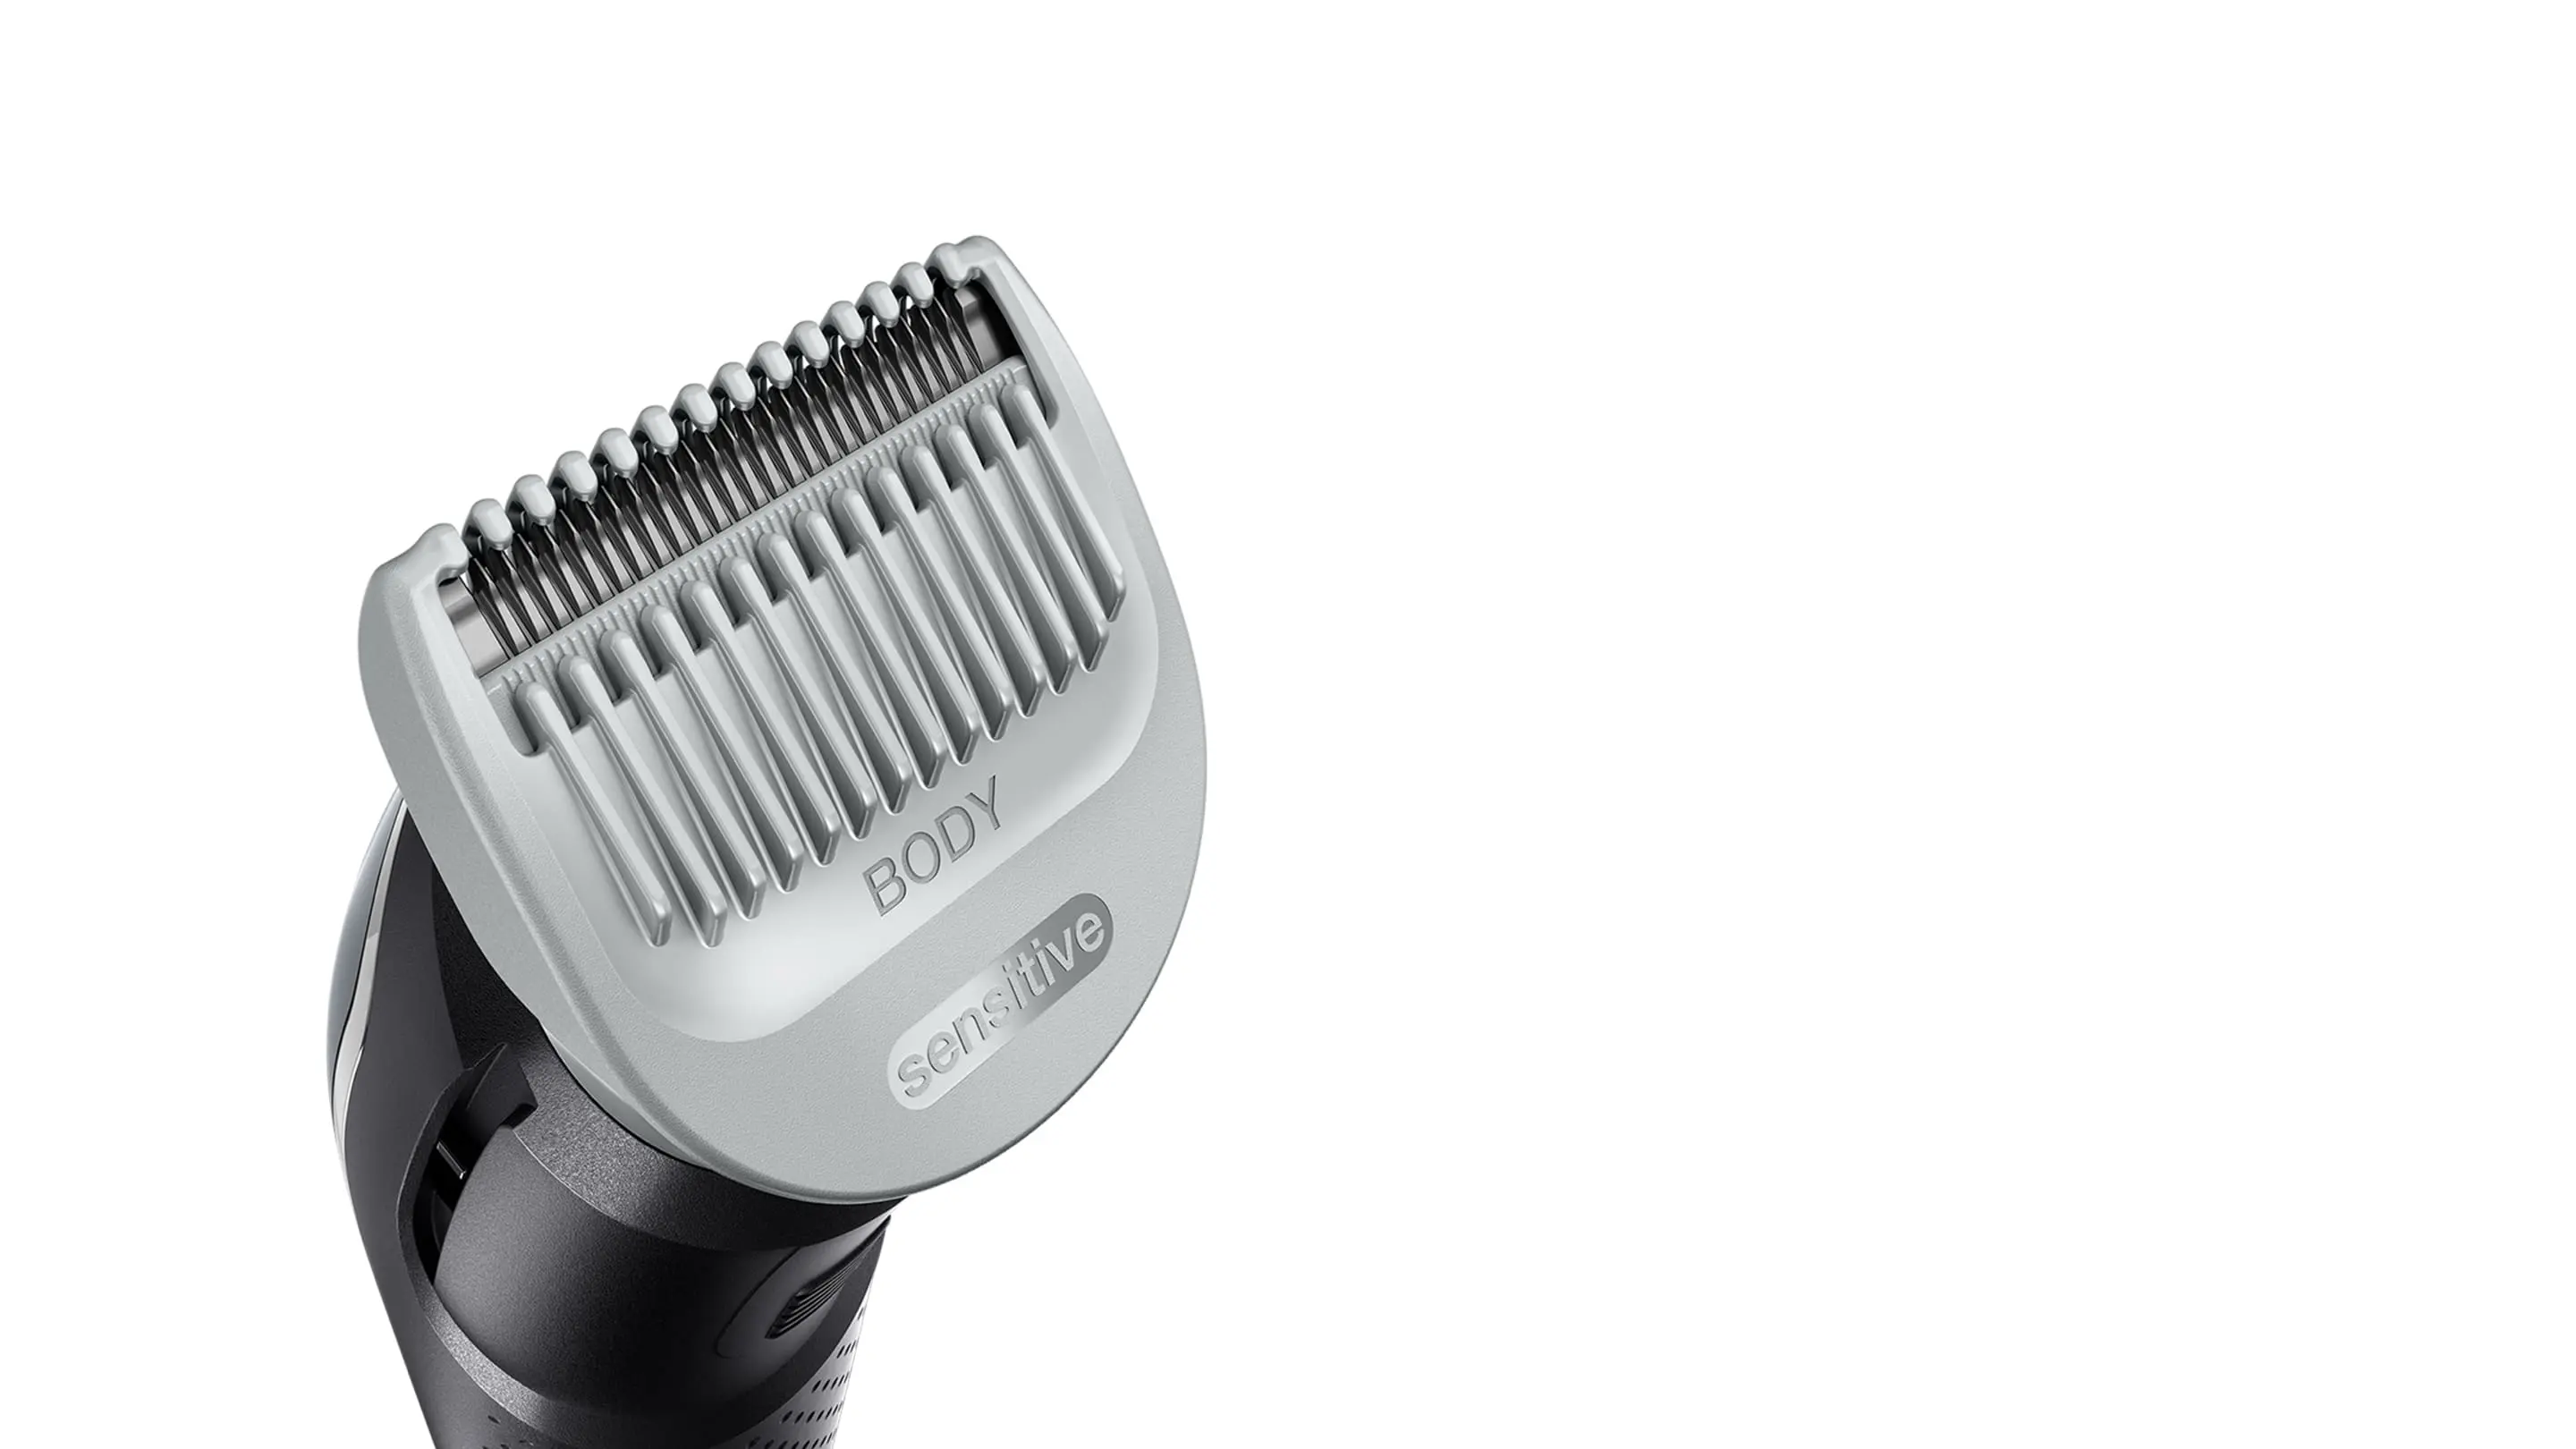 Product head with sensitive comb